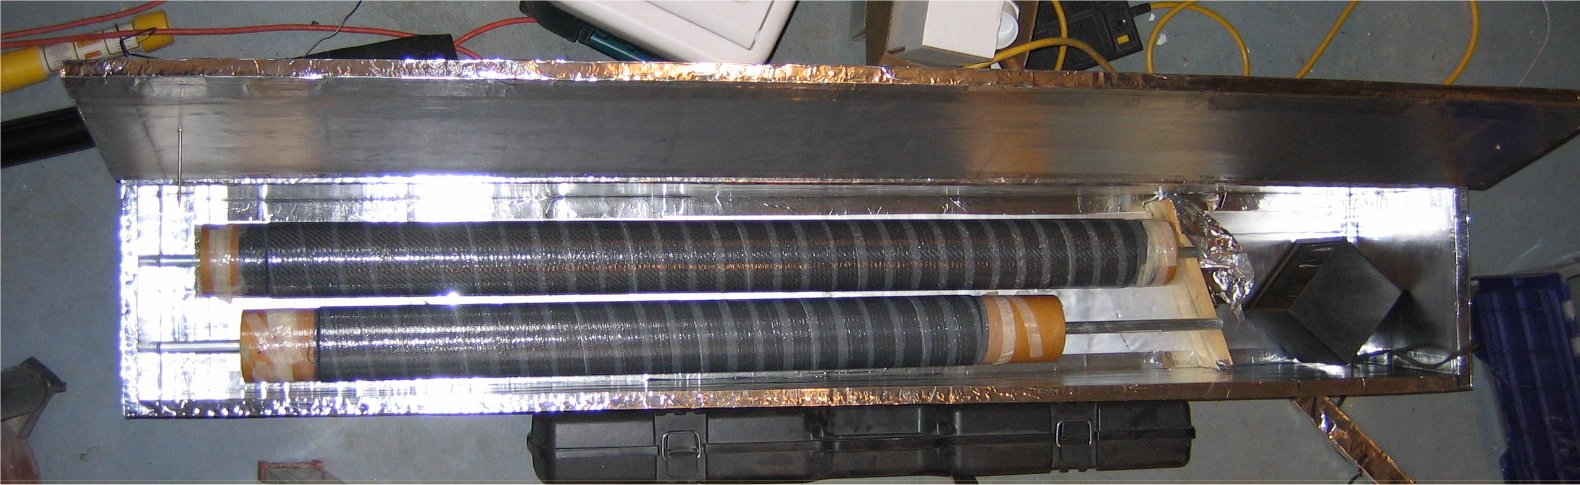 Curing Oven, Composite Curing Oven